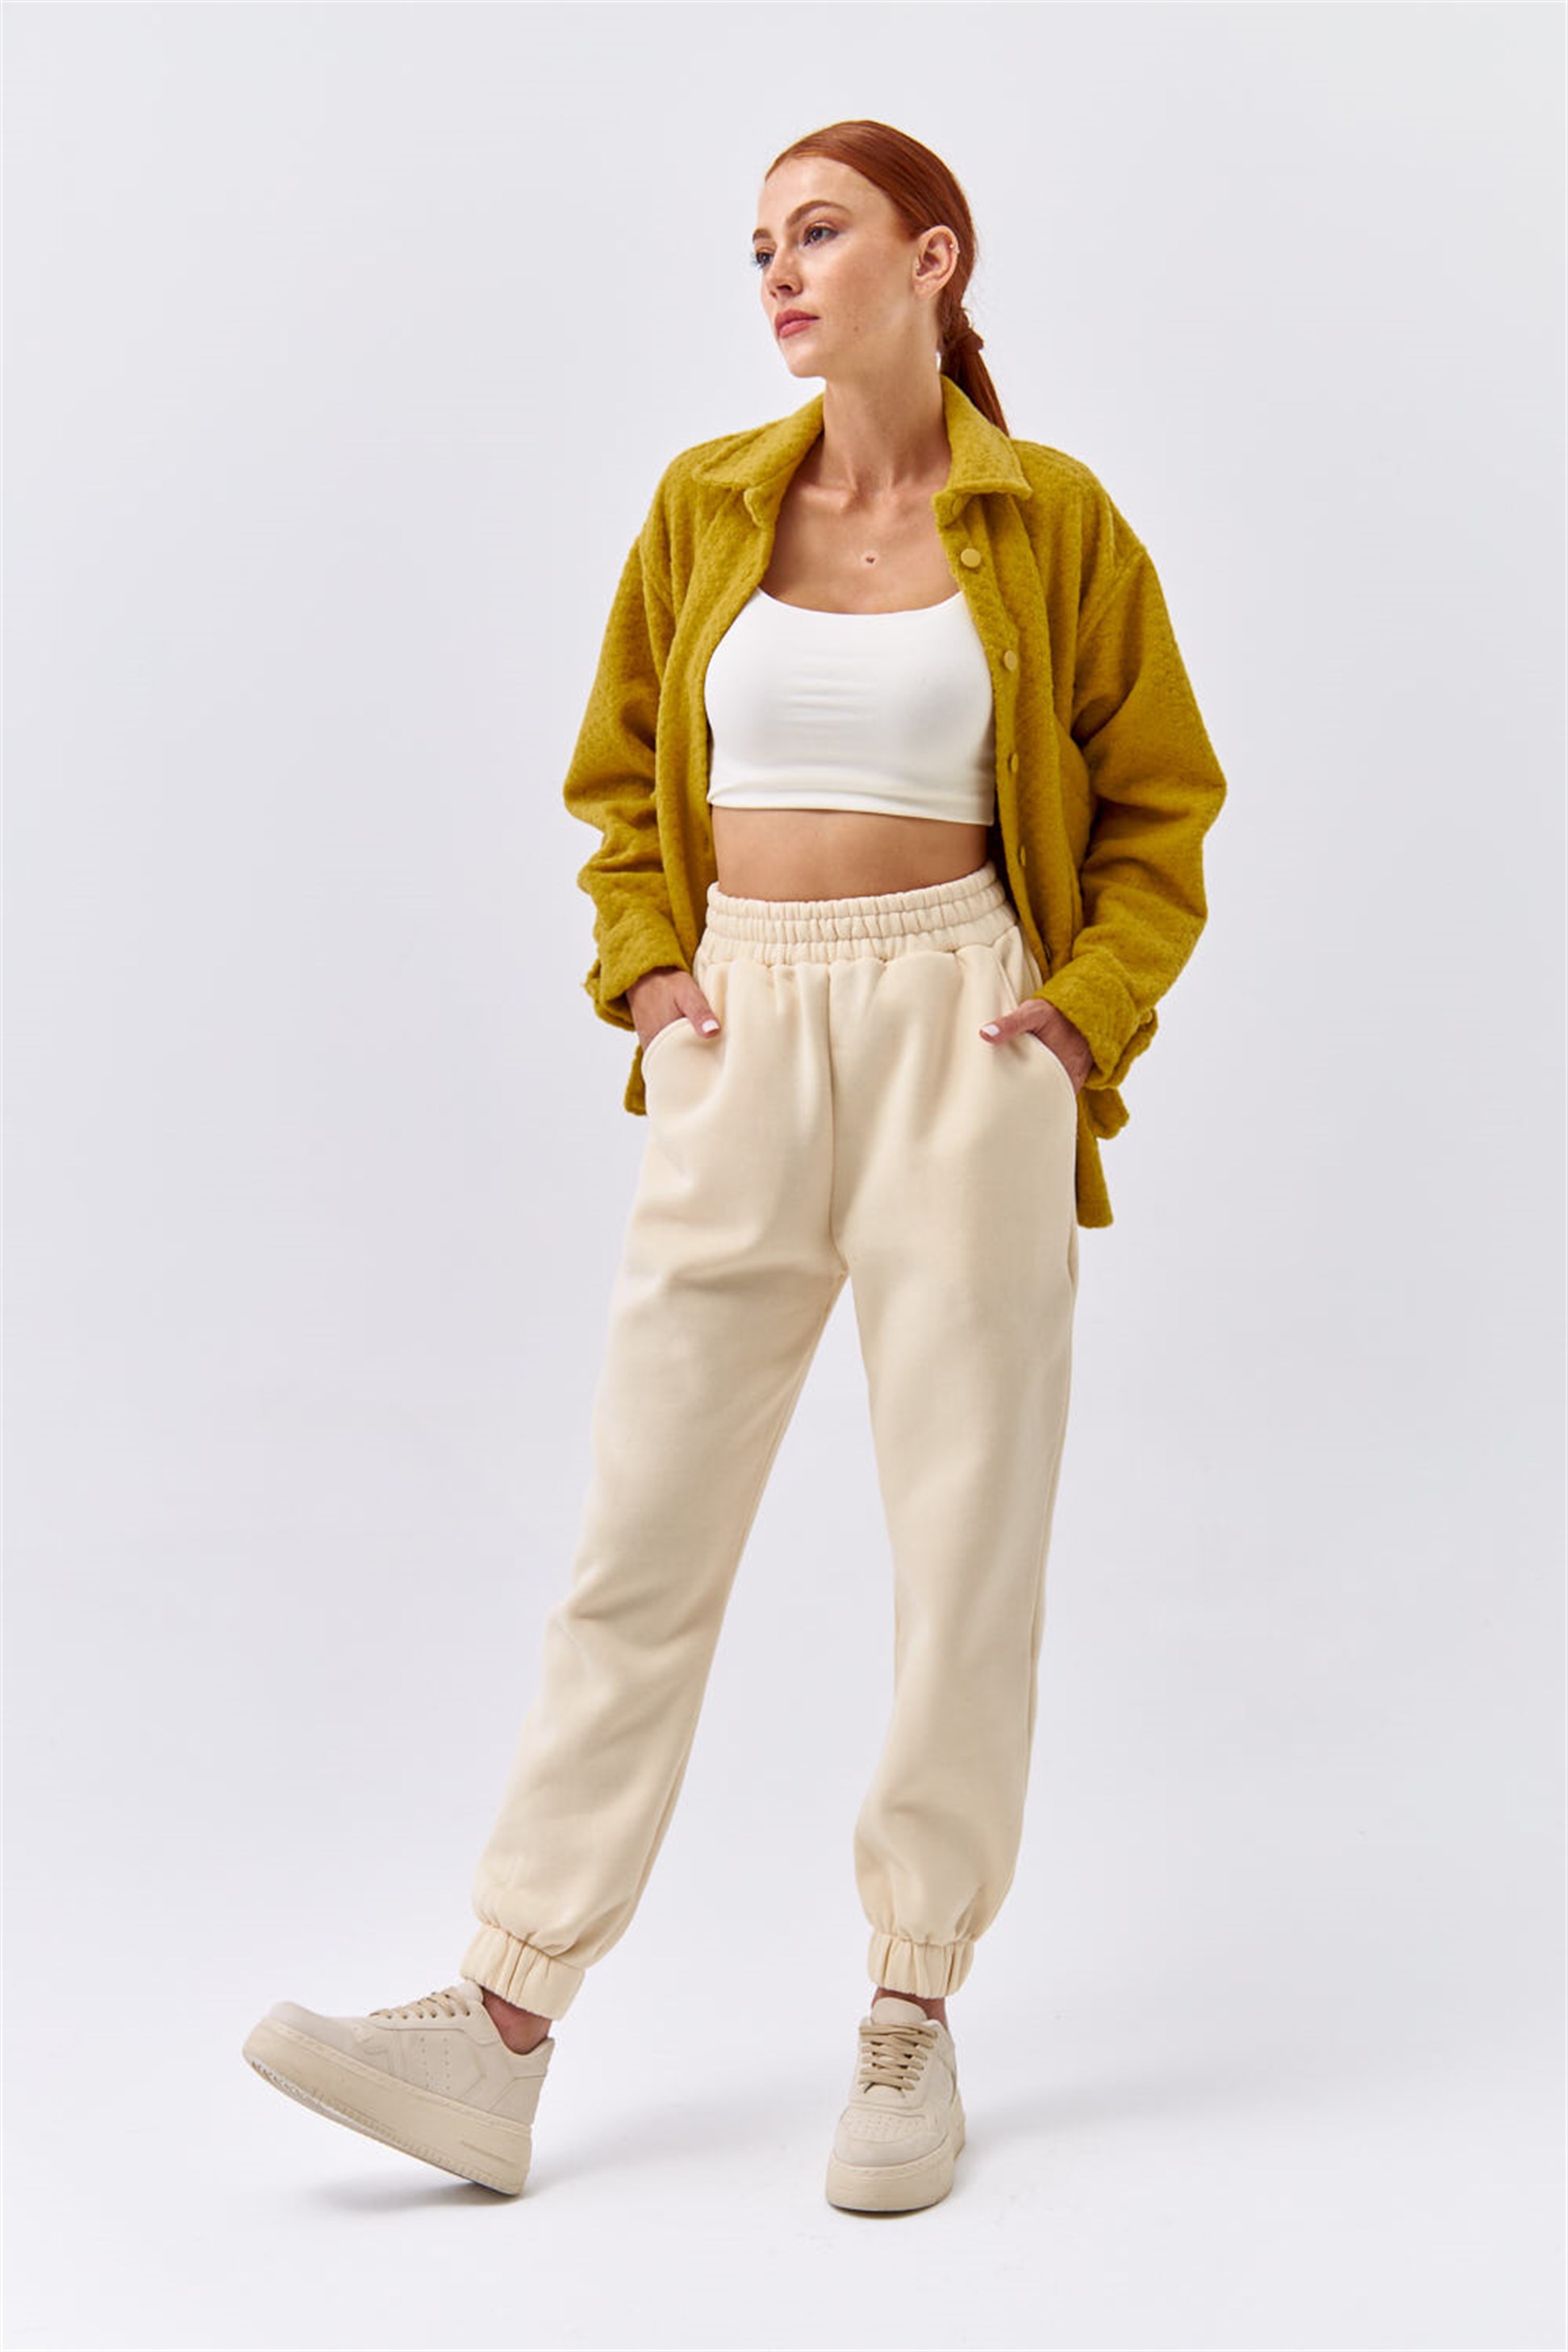 discount 68% Oysho tracksuit and joggers WOMEN FASHION Trousers Tracksuit and joggers Baggy Beige M 